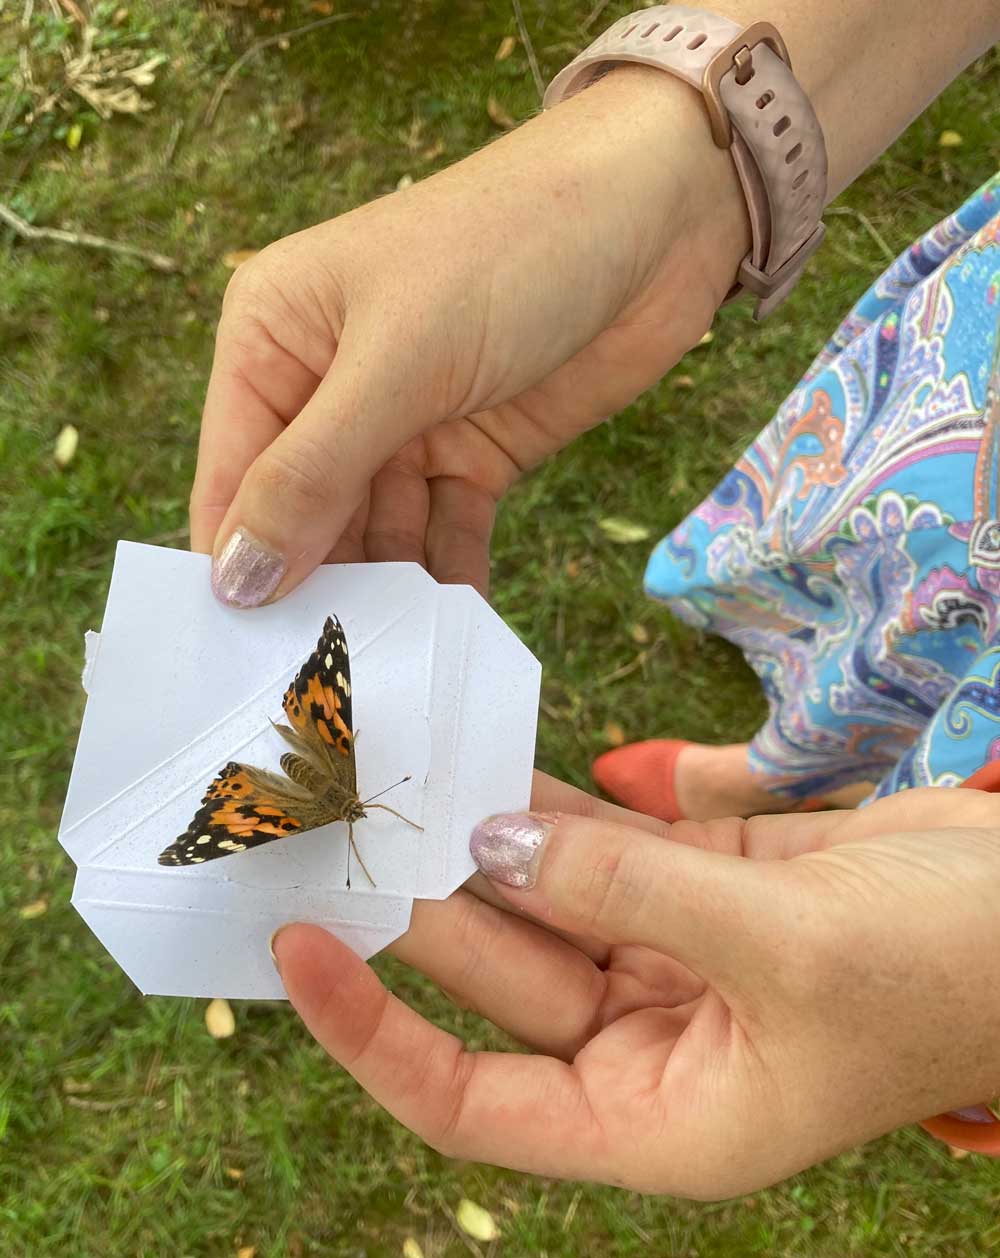 Woman releasing a butterfly outside during Ohio's Hospice LifeCare Butterfly Release